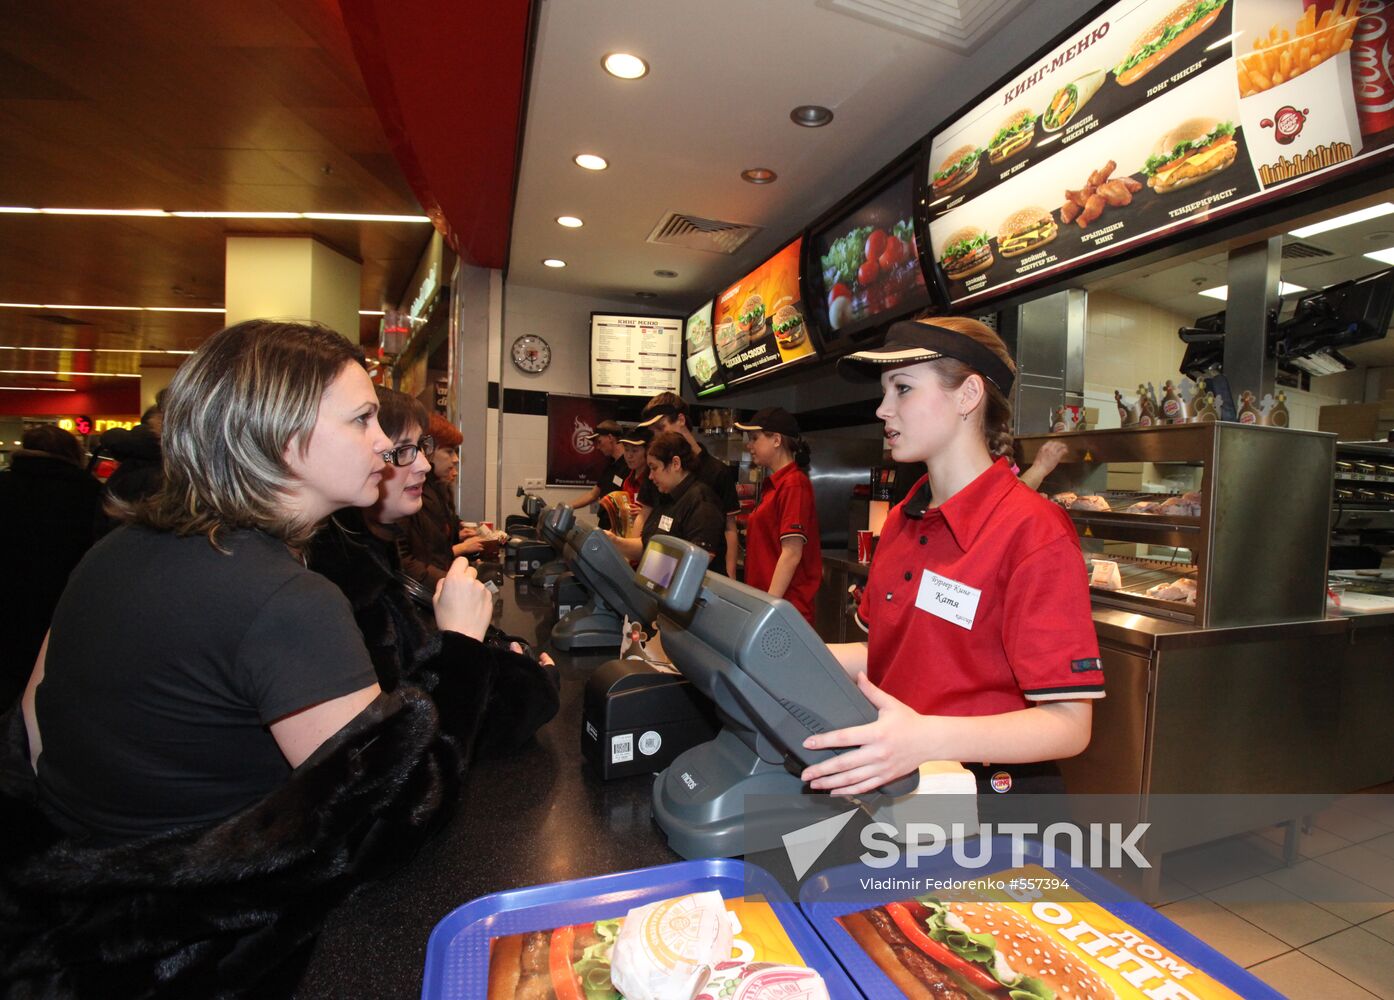 Burger King opens its first restaurant in Moscow